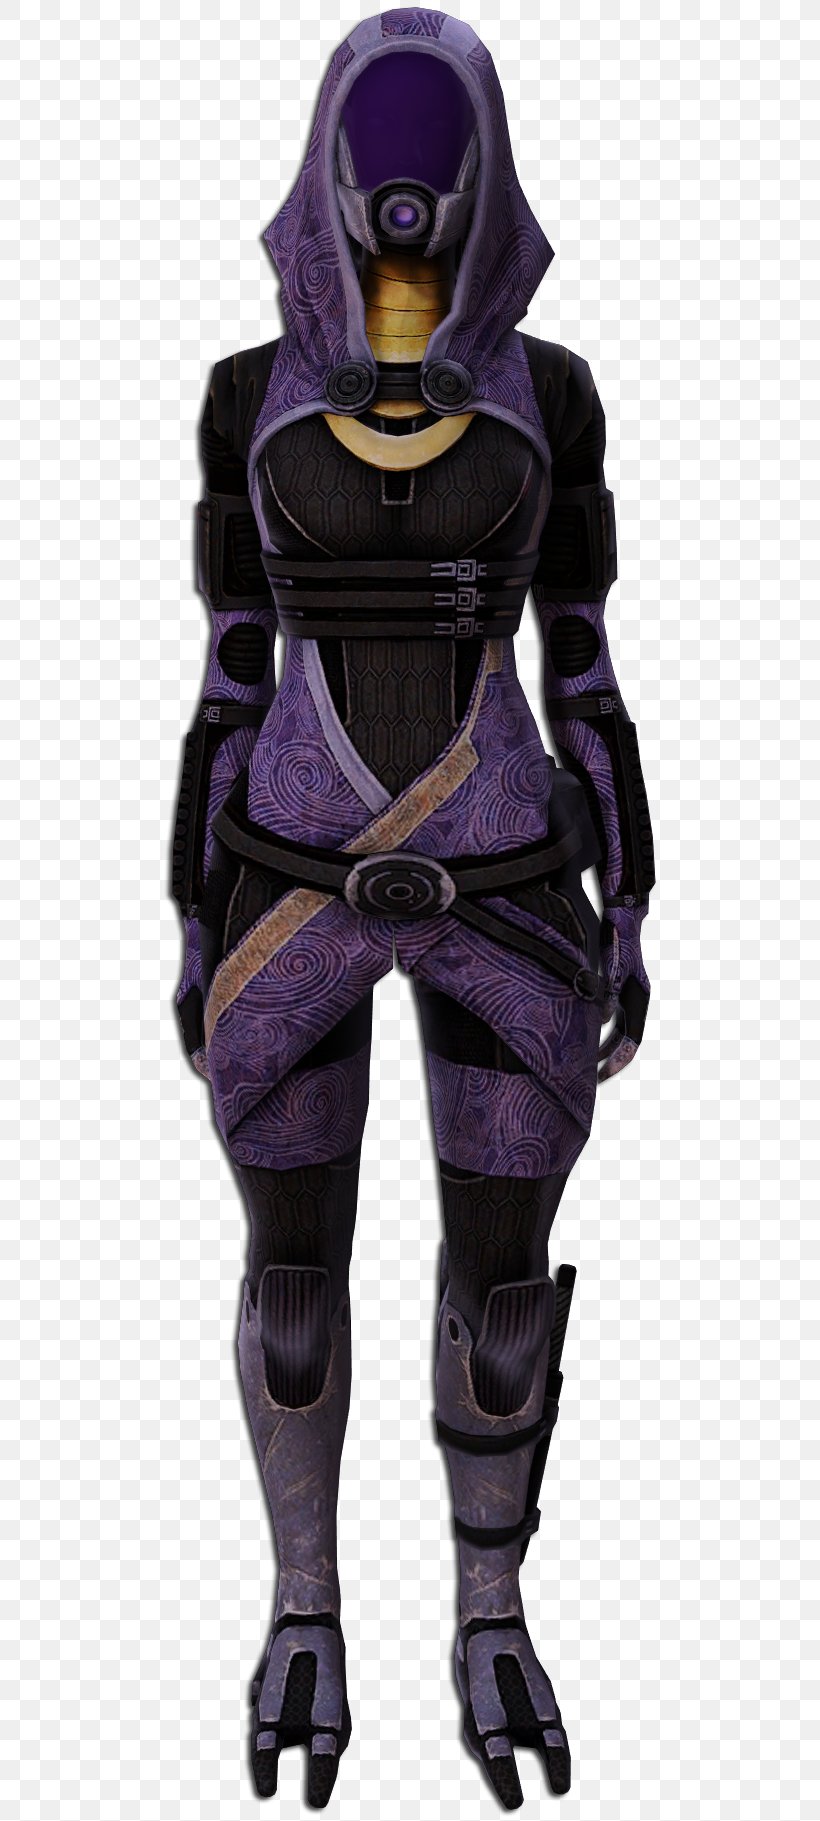 Mass Effect 2 Costume Design Tali'Zorah Character, PNG, 603x1821px, Mass Effect 2, Action Figure, Character, Costume, Costume Design Download Free